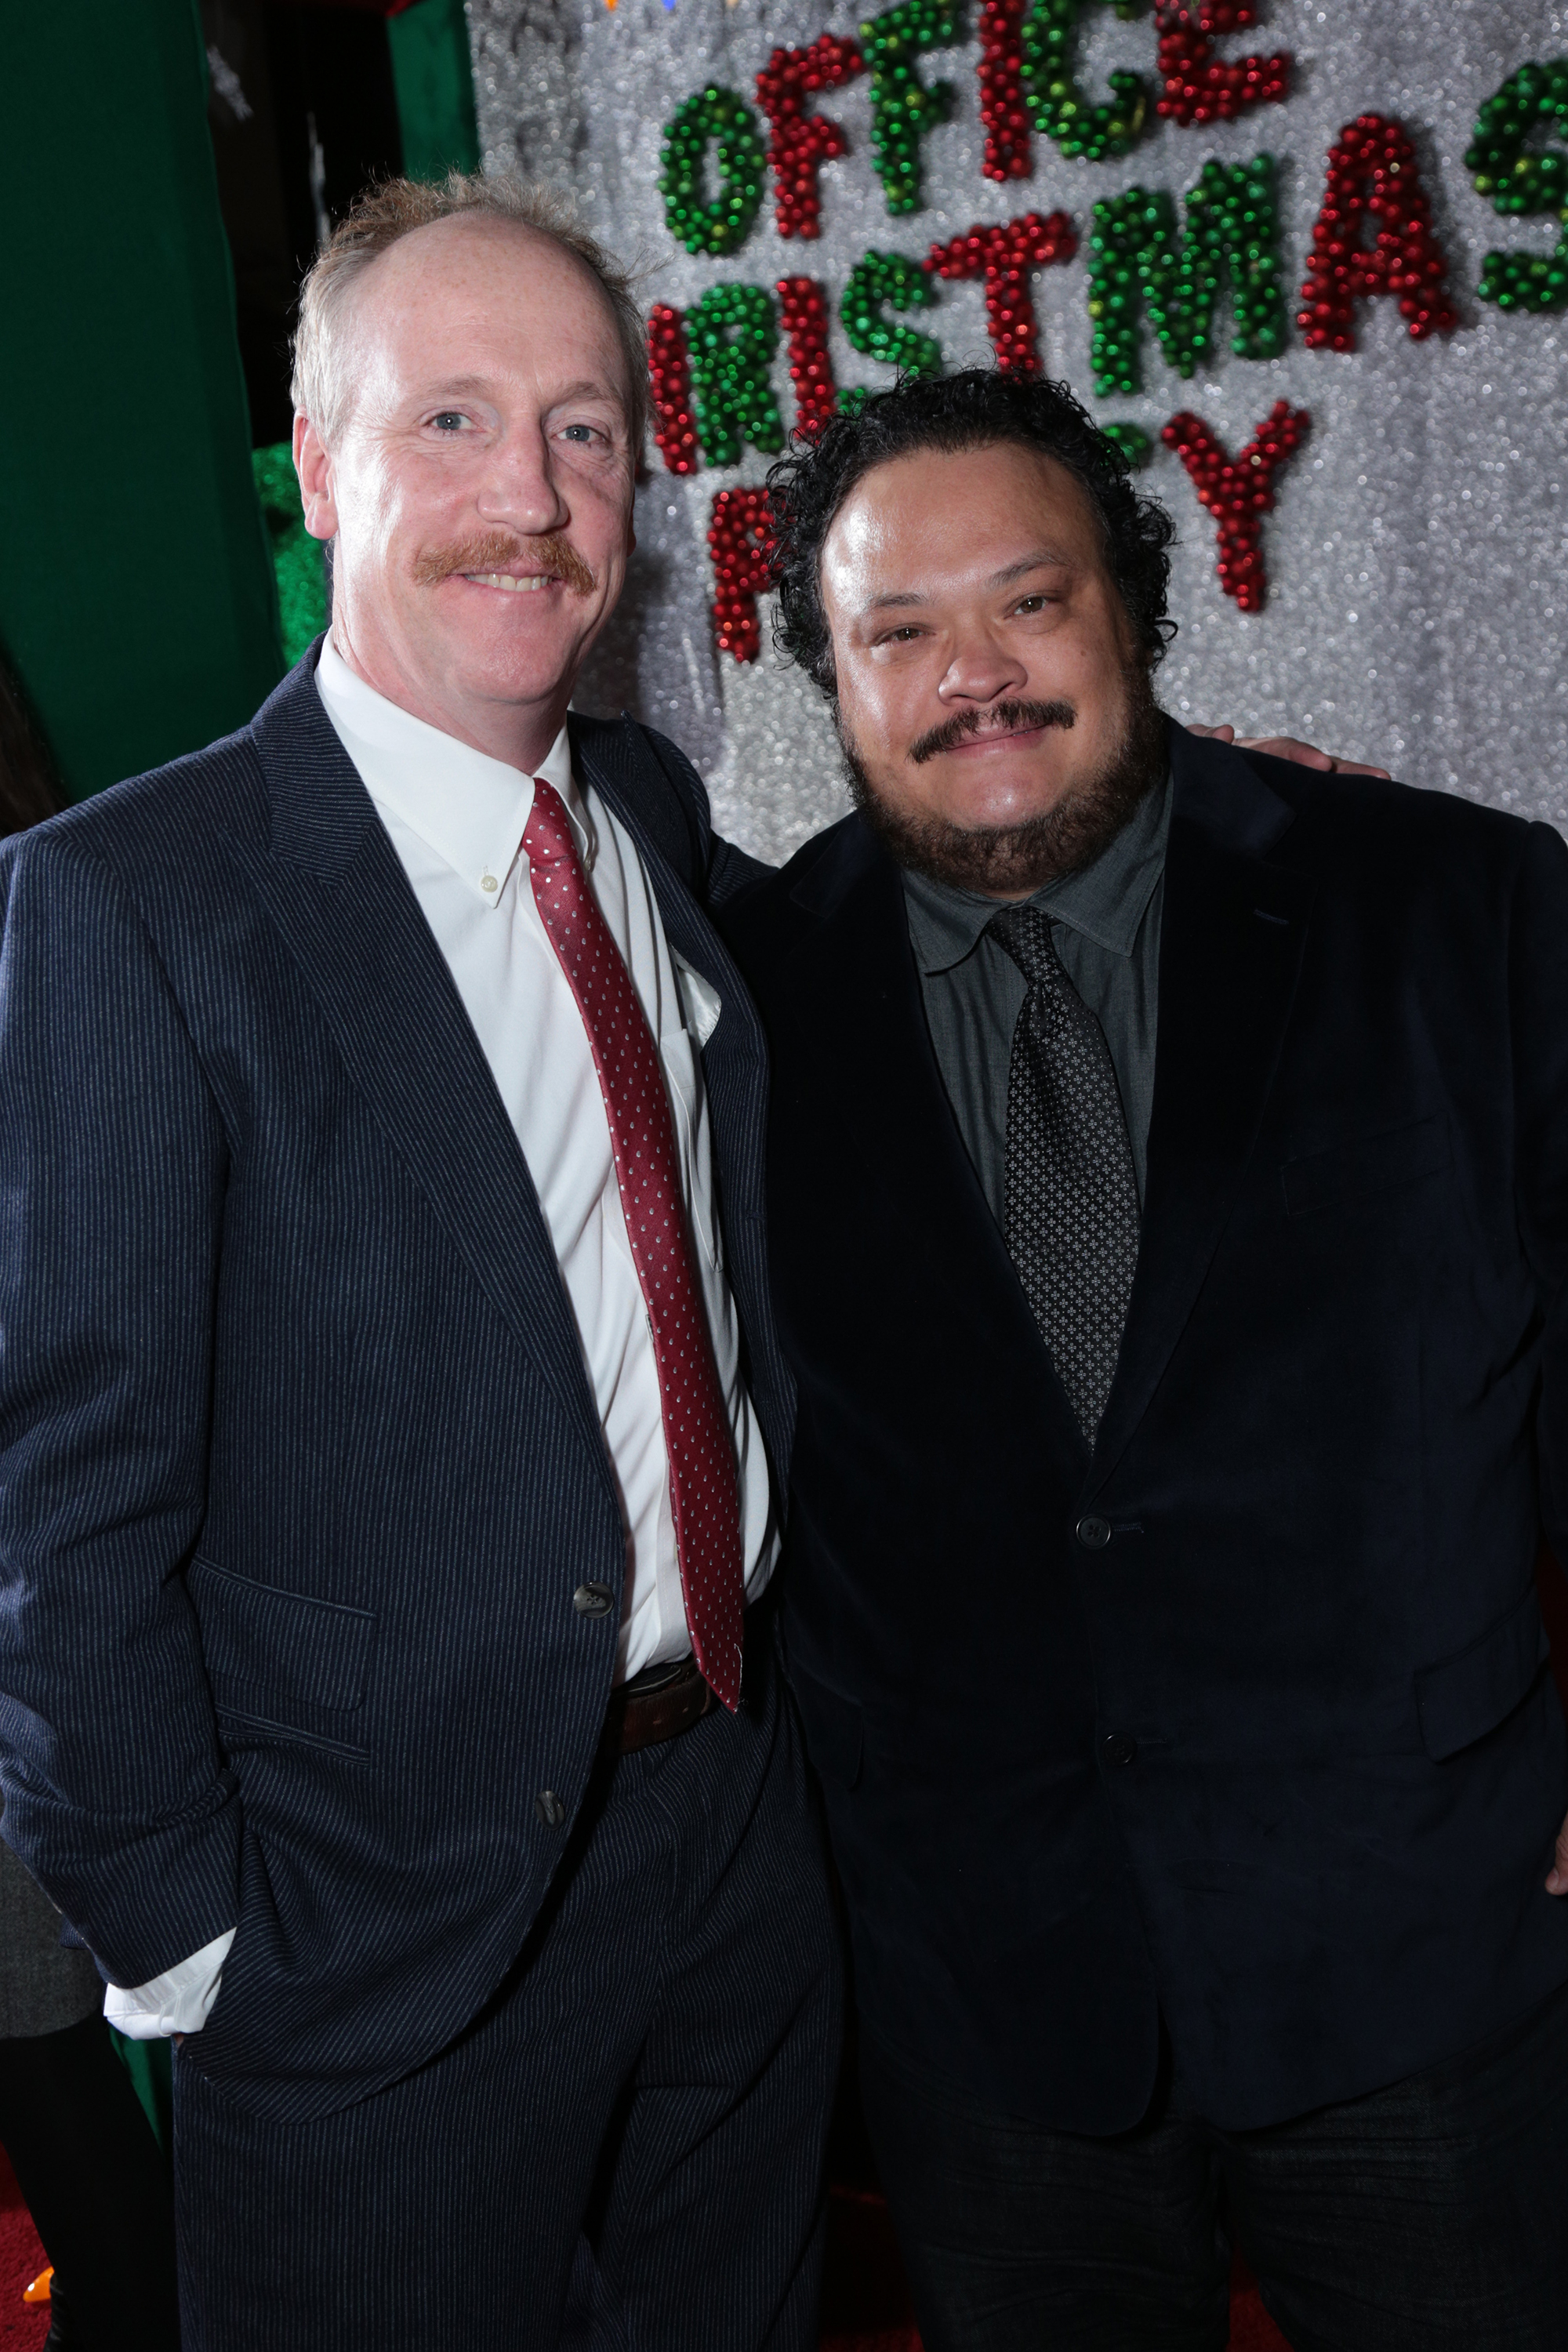 Matt Walsh and Adrian Martinez pose as Paramount Pictures presents the Los Angeles premiere of "Office Christmas Party" at the Regency Village Theater in Los Angeles, CA on Wednesday, December 7, 2016  (Photo: Alex J. Berliner / ABImages)